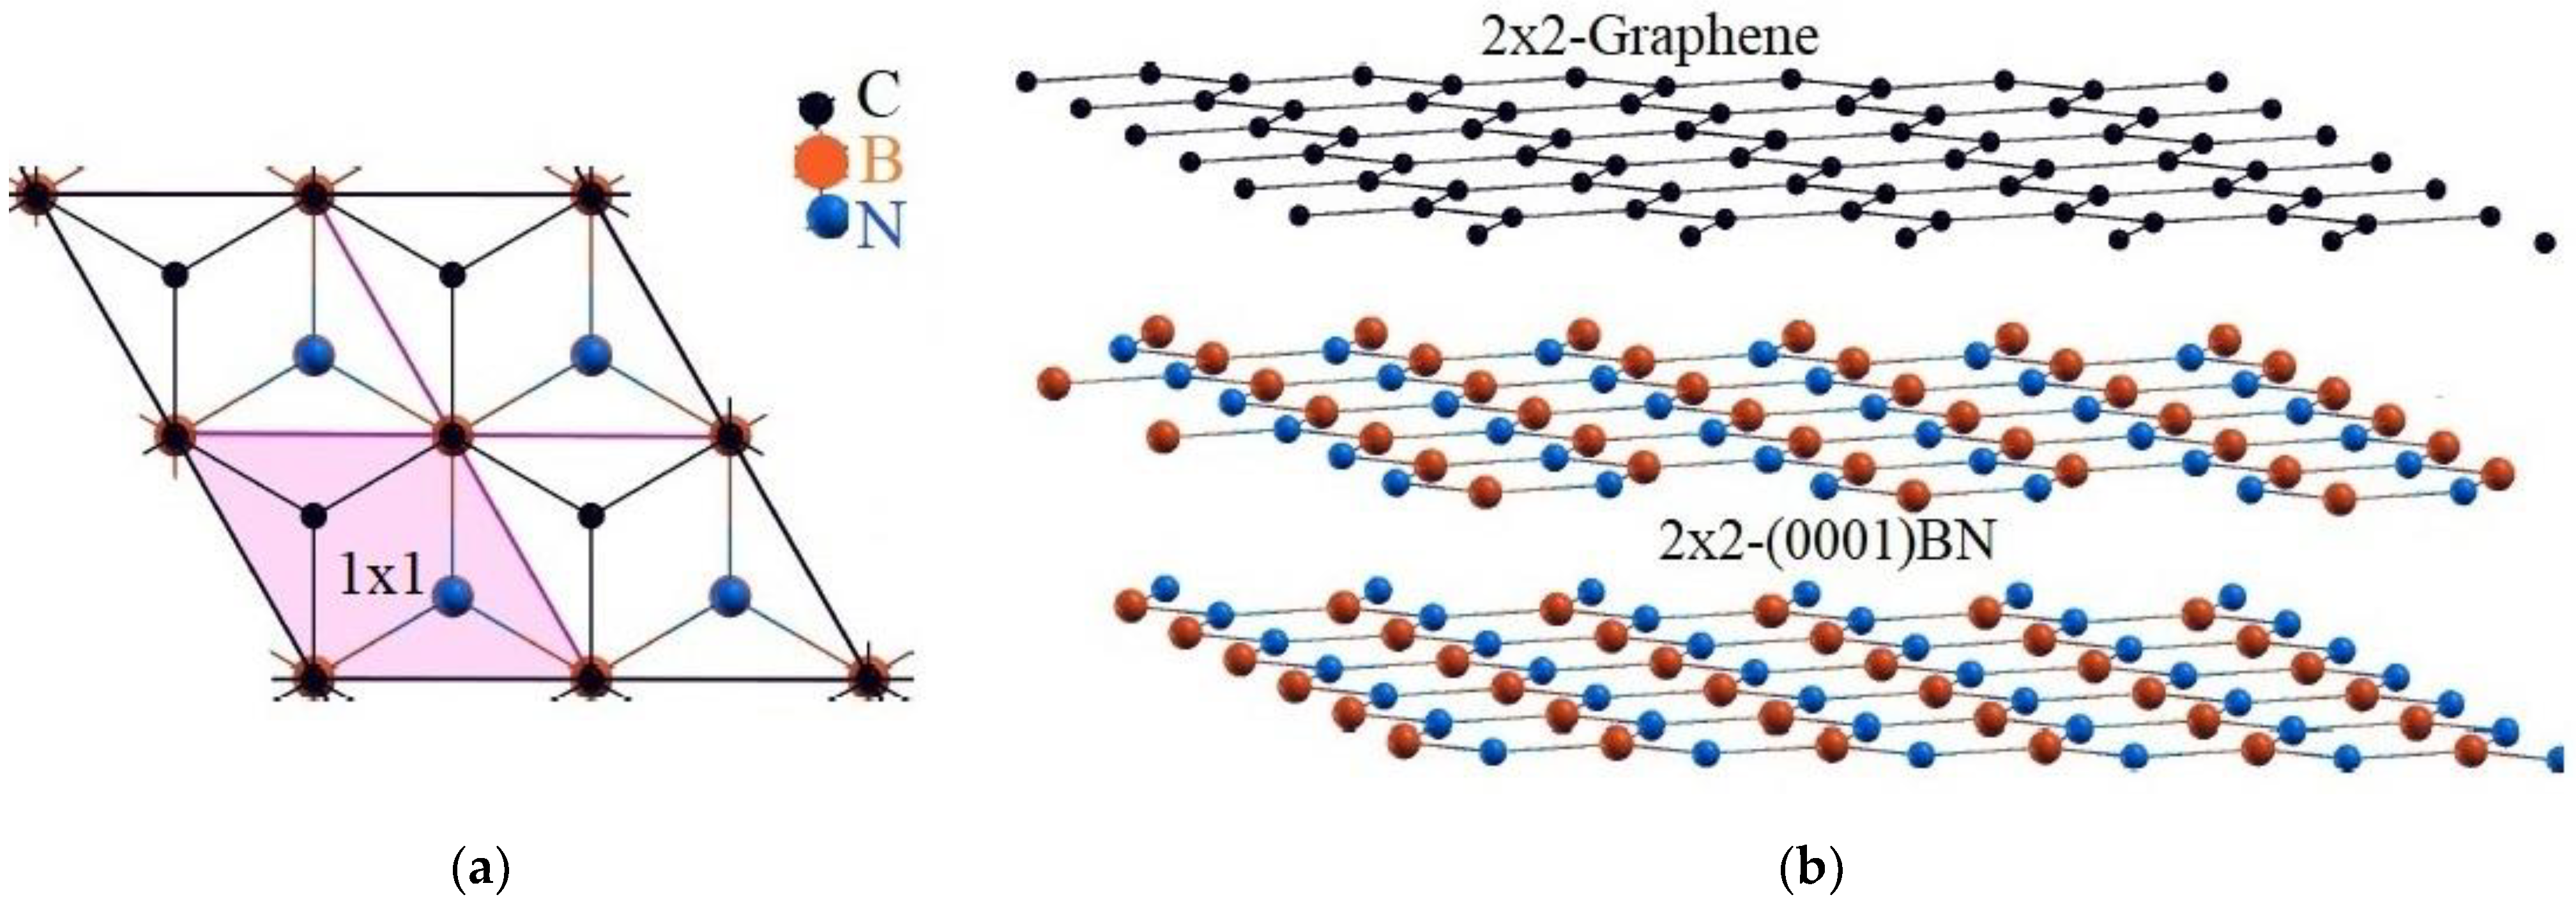 Coatings | Free Full-Text | Electronic Structure of Graphene on 